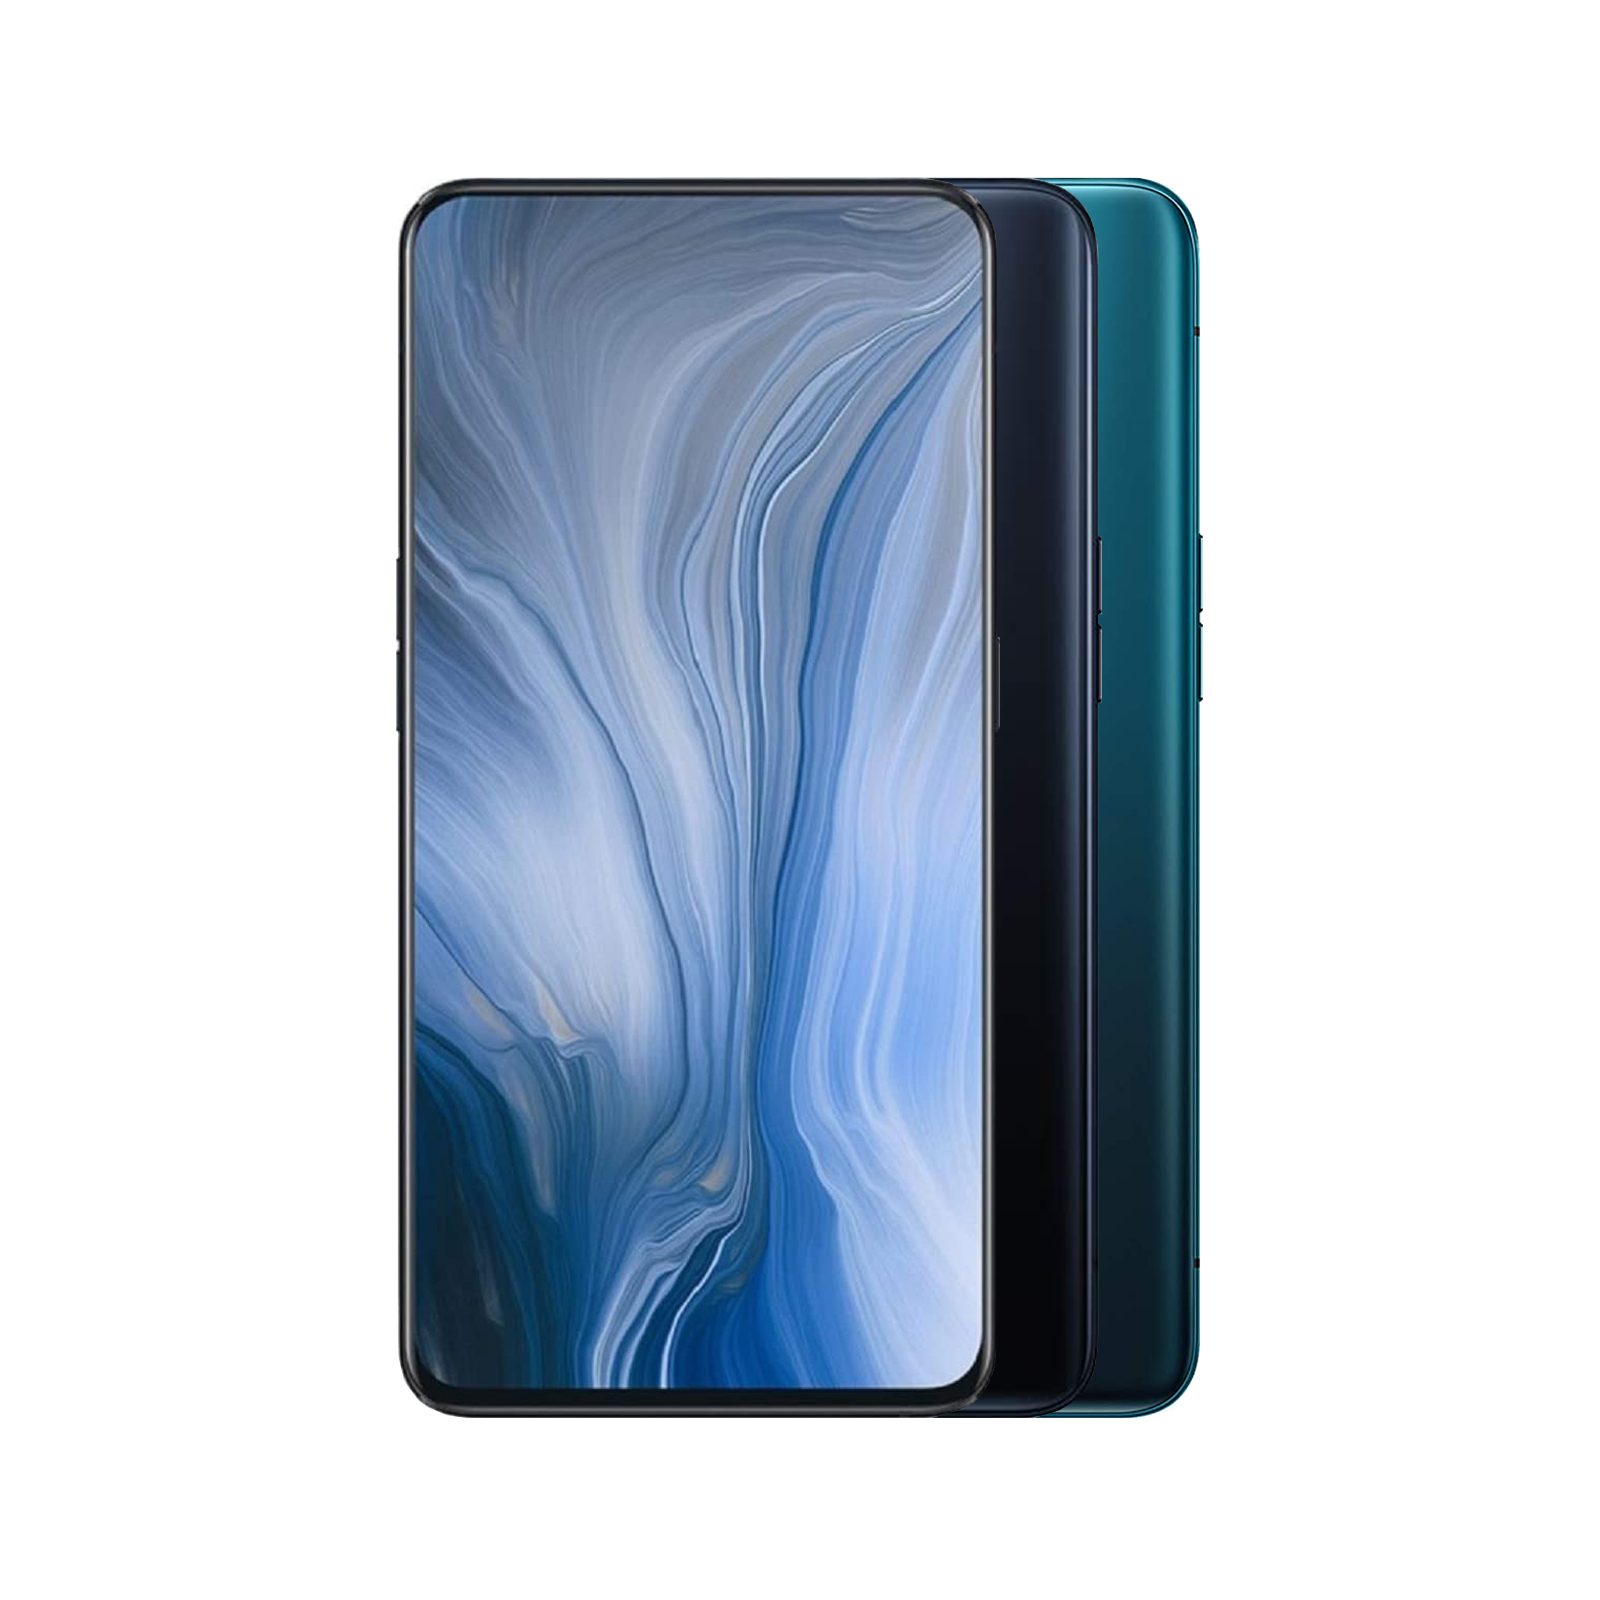 Oppo Reno 5G - New Never Used